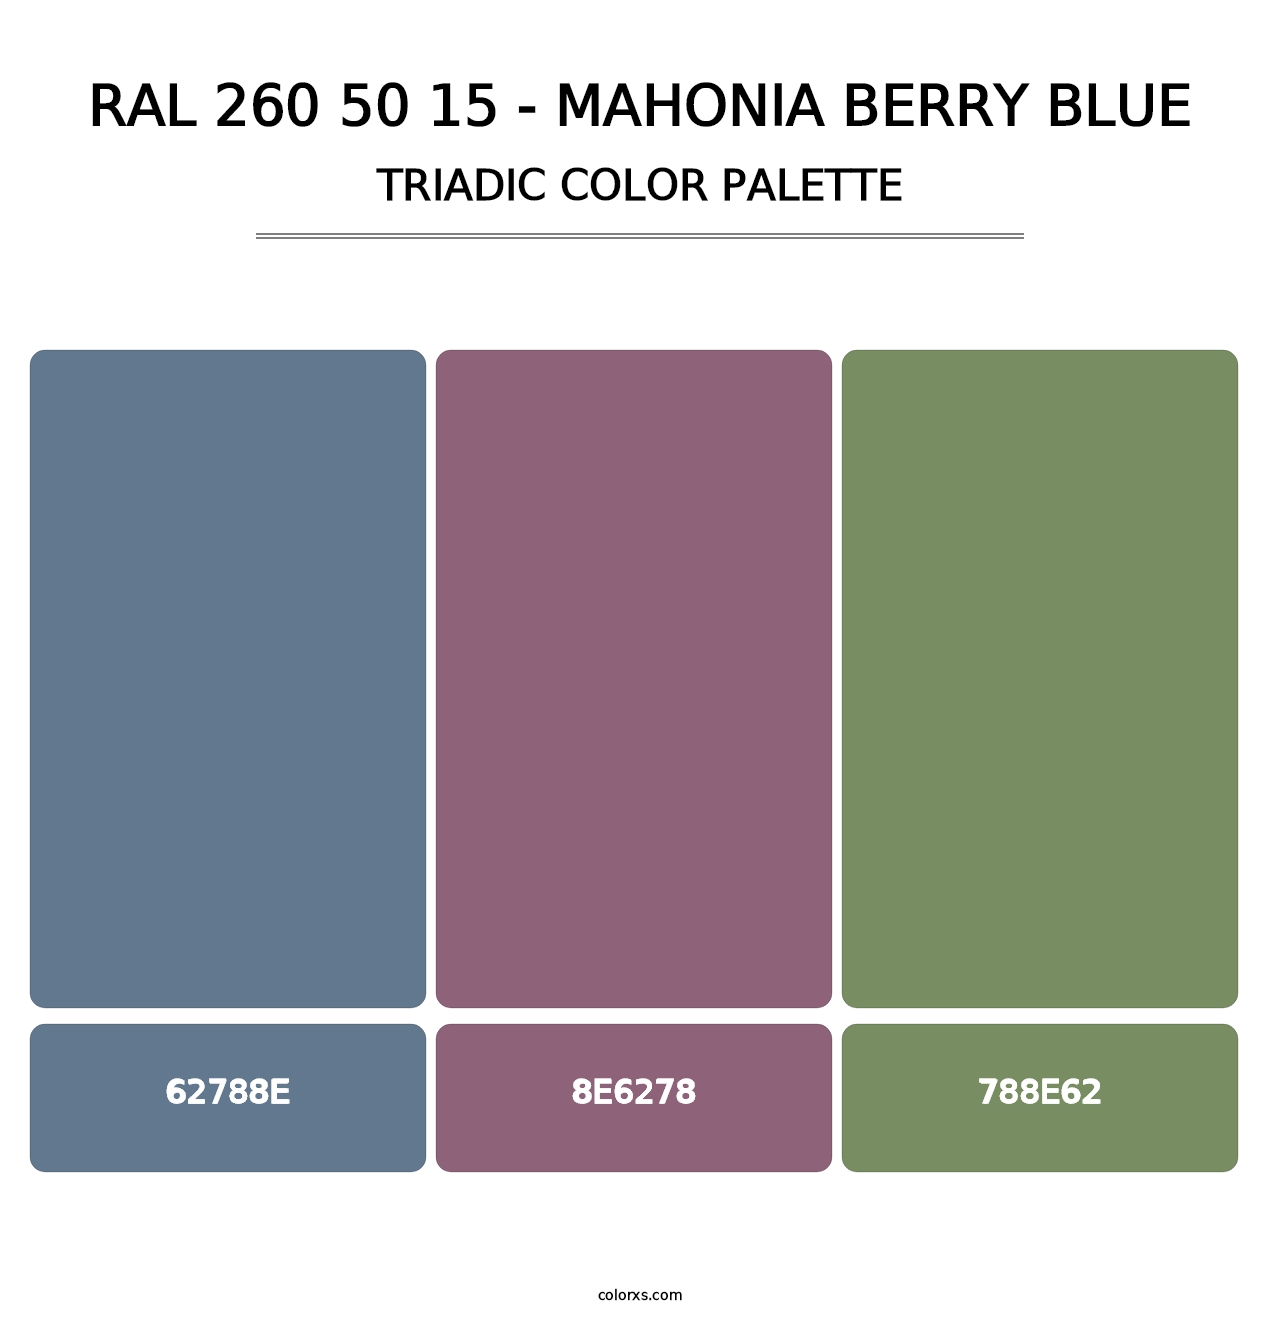 RAL 260 50 15 - Mahonia Berry Blue - Triadic Color Palette